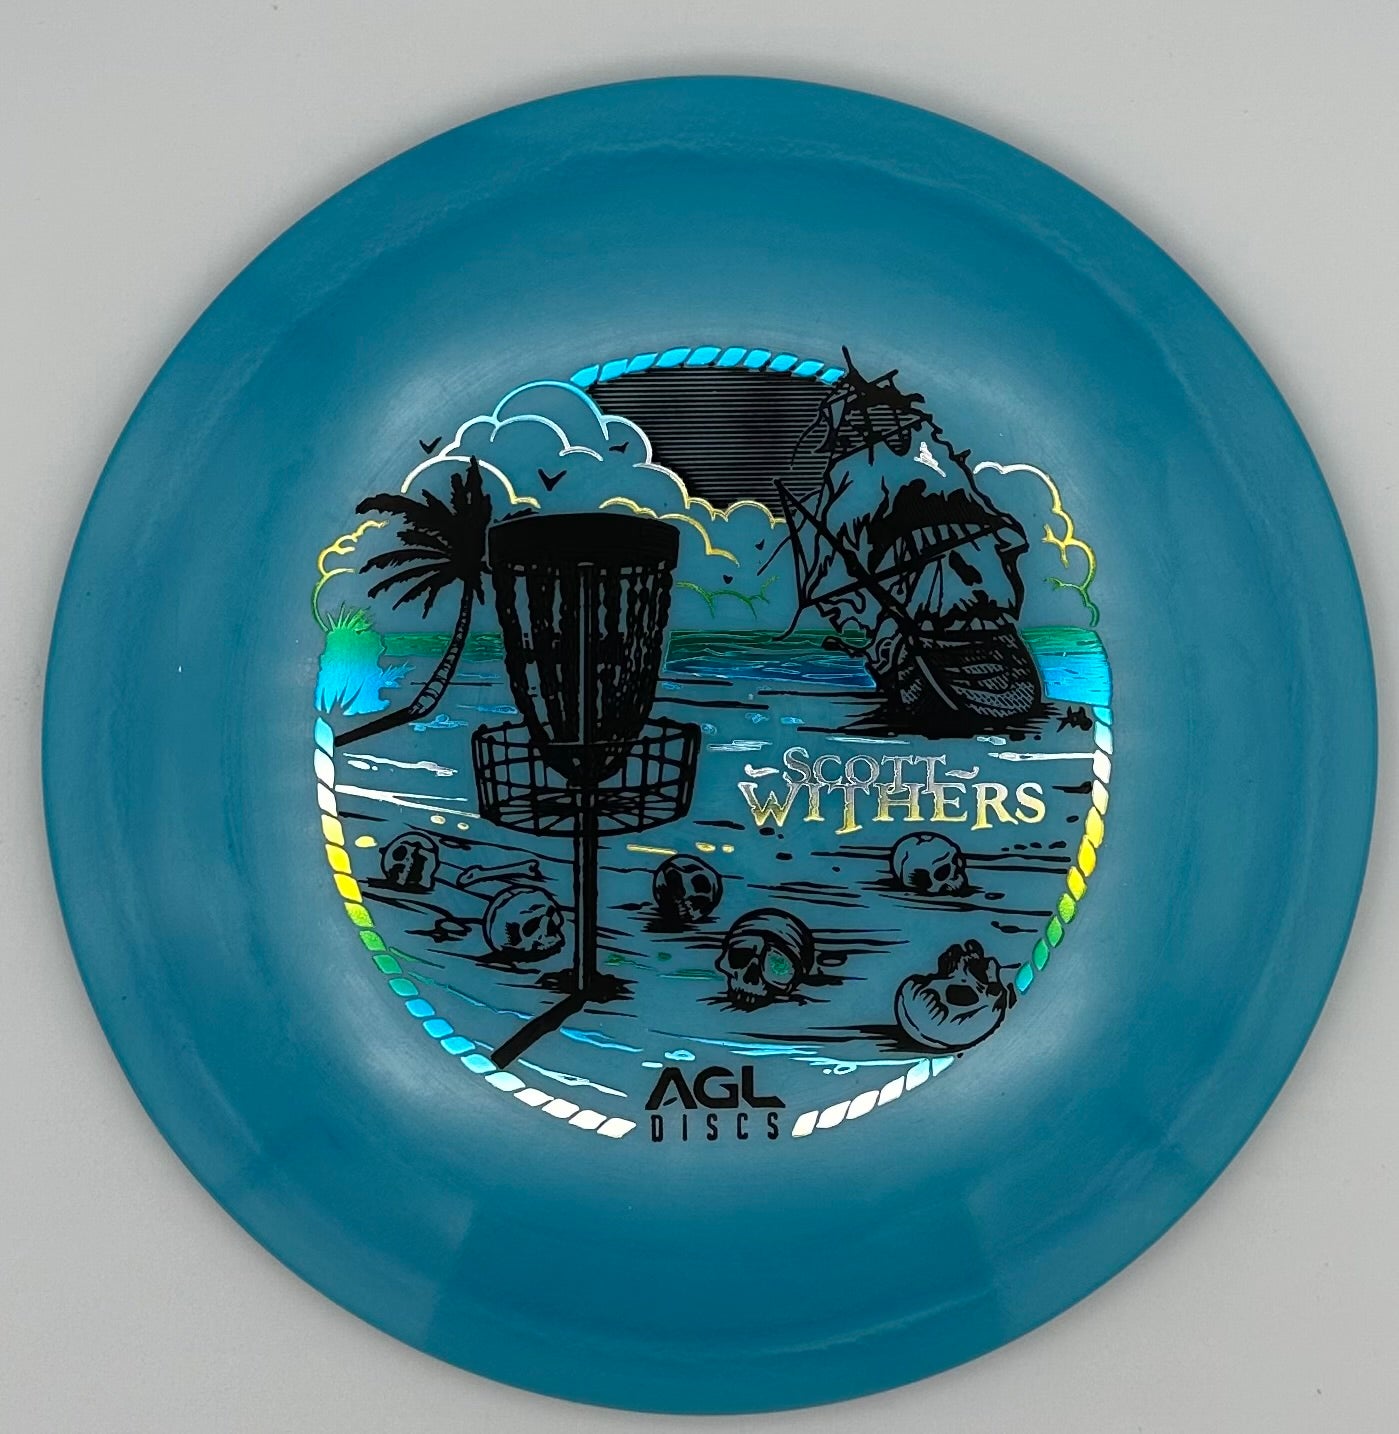 AGL Discs - Tundra Alpine Sycamore (Scott Withers Tour Stamp)